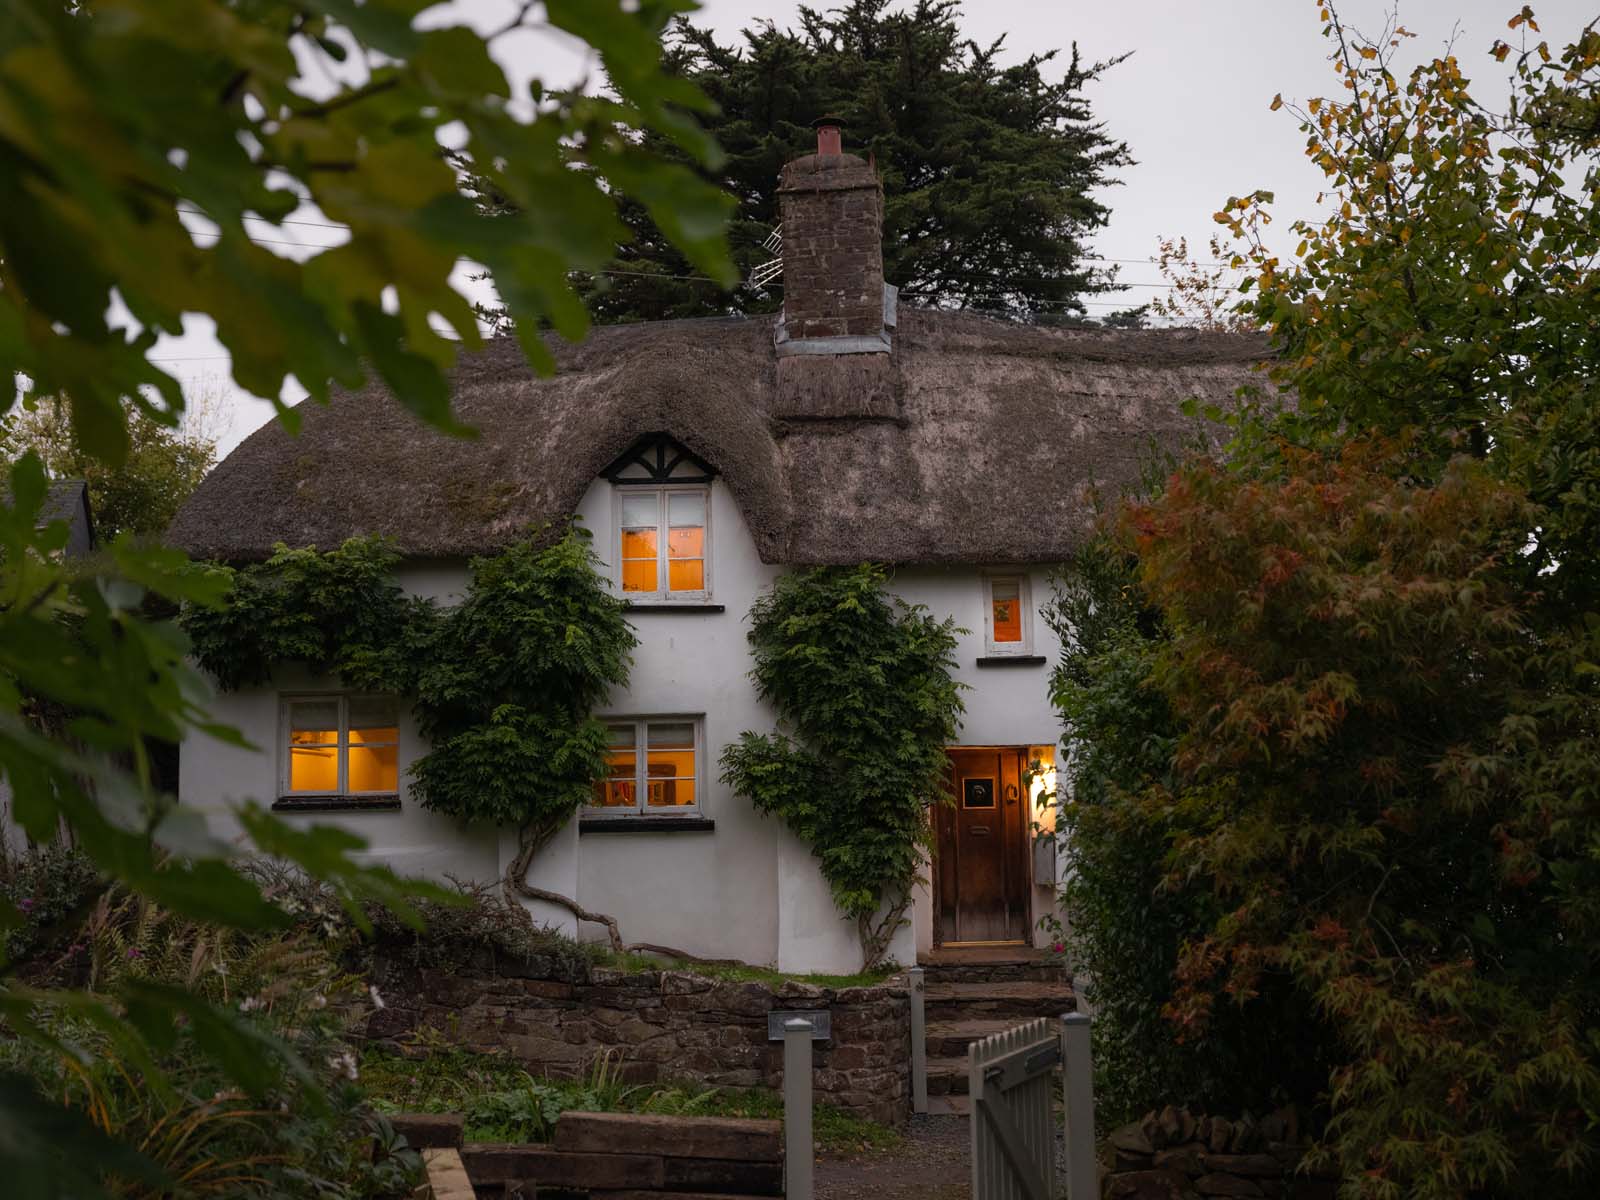 Thatched Cottage Exterior at dusk surrounded by leaves